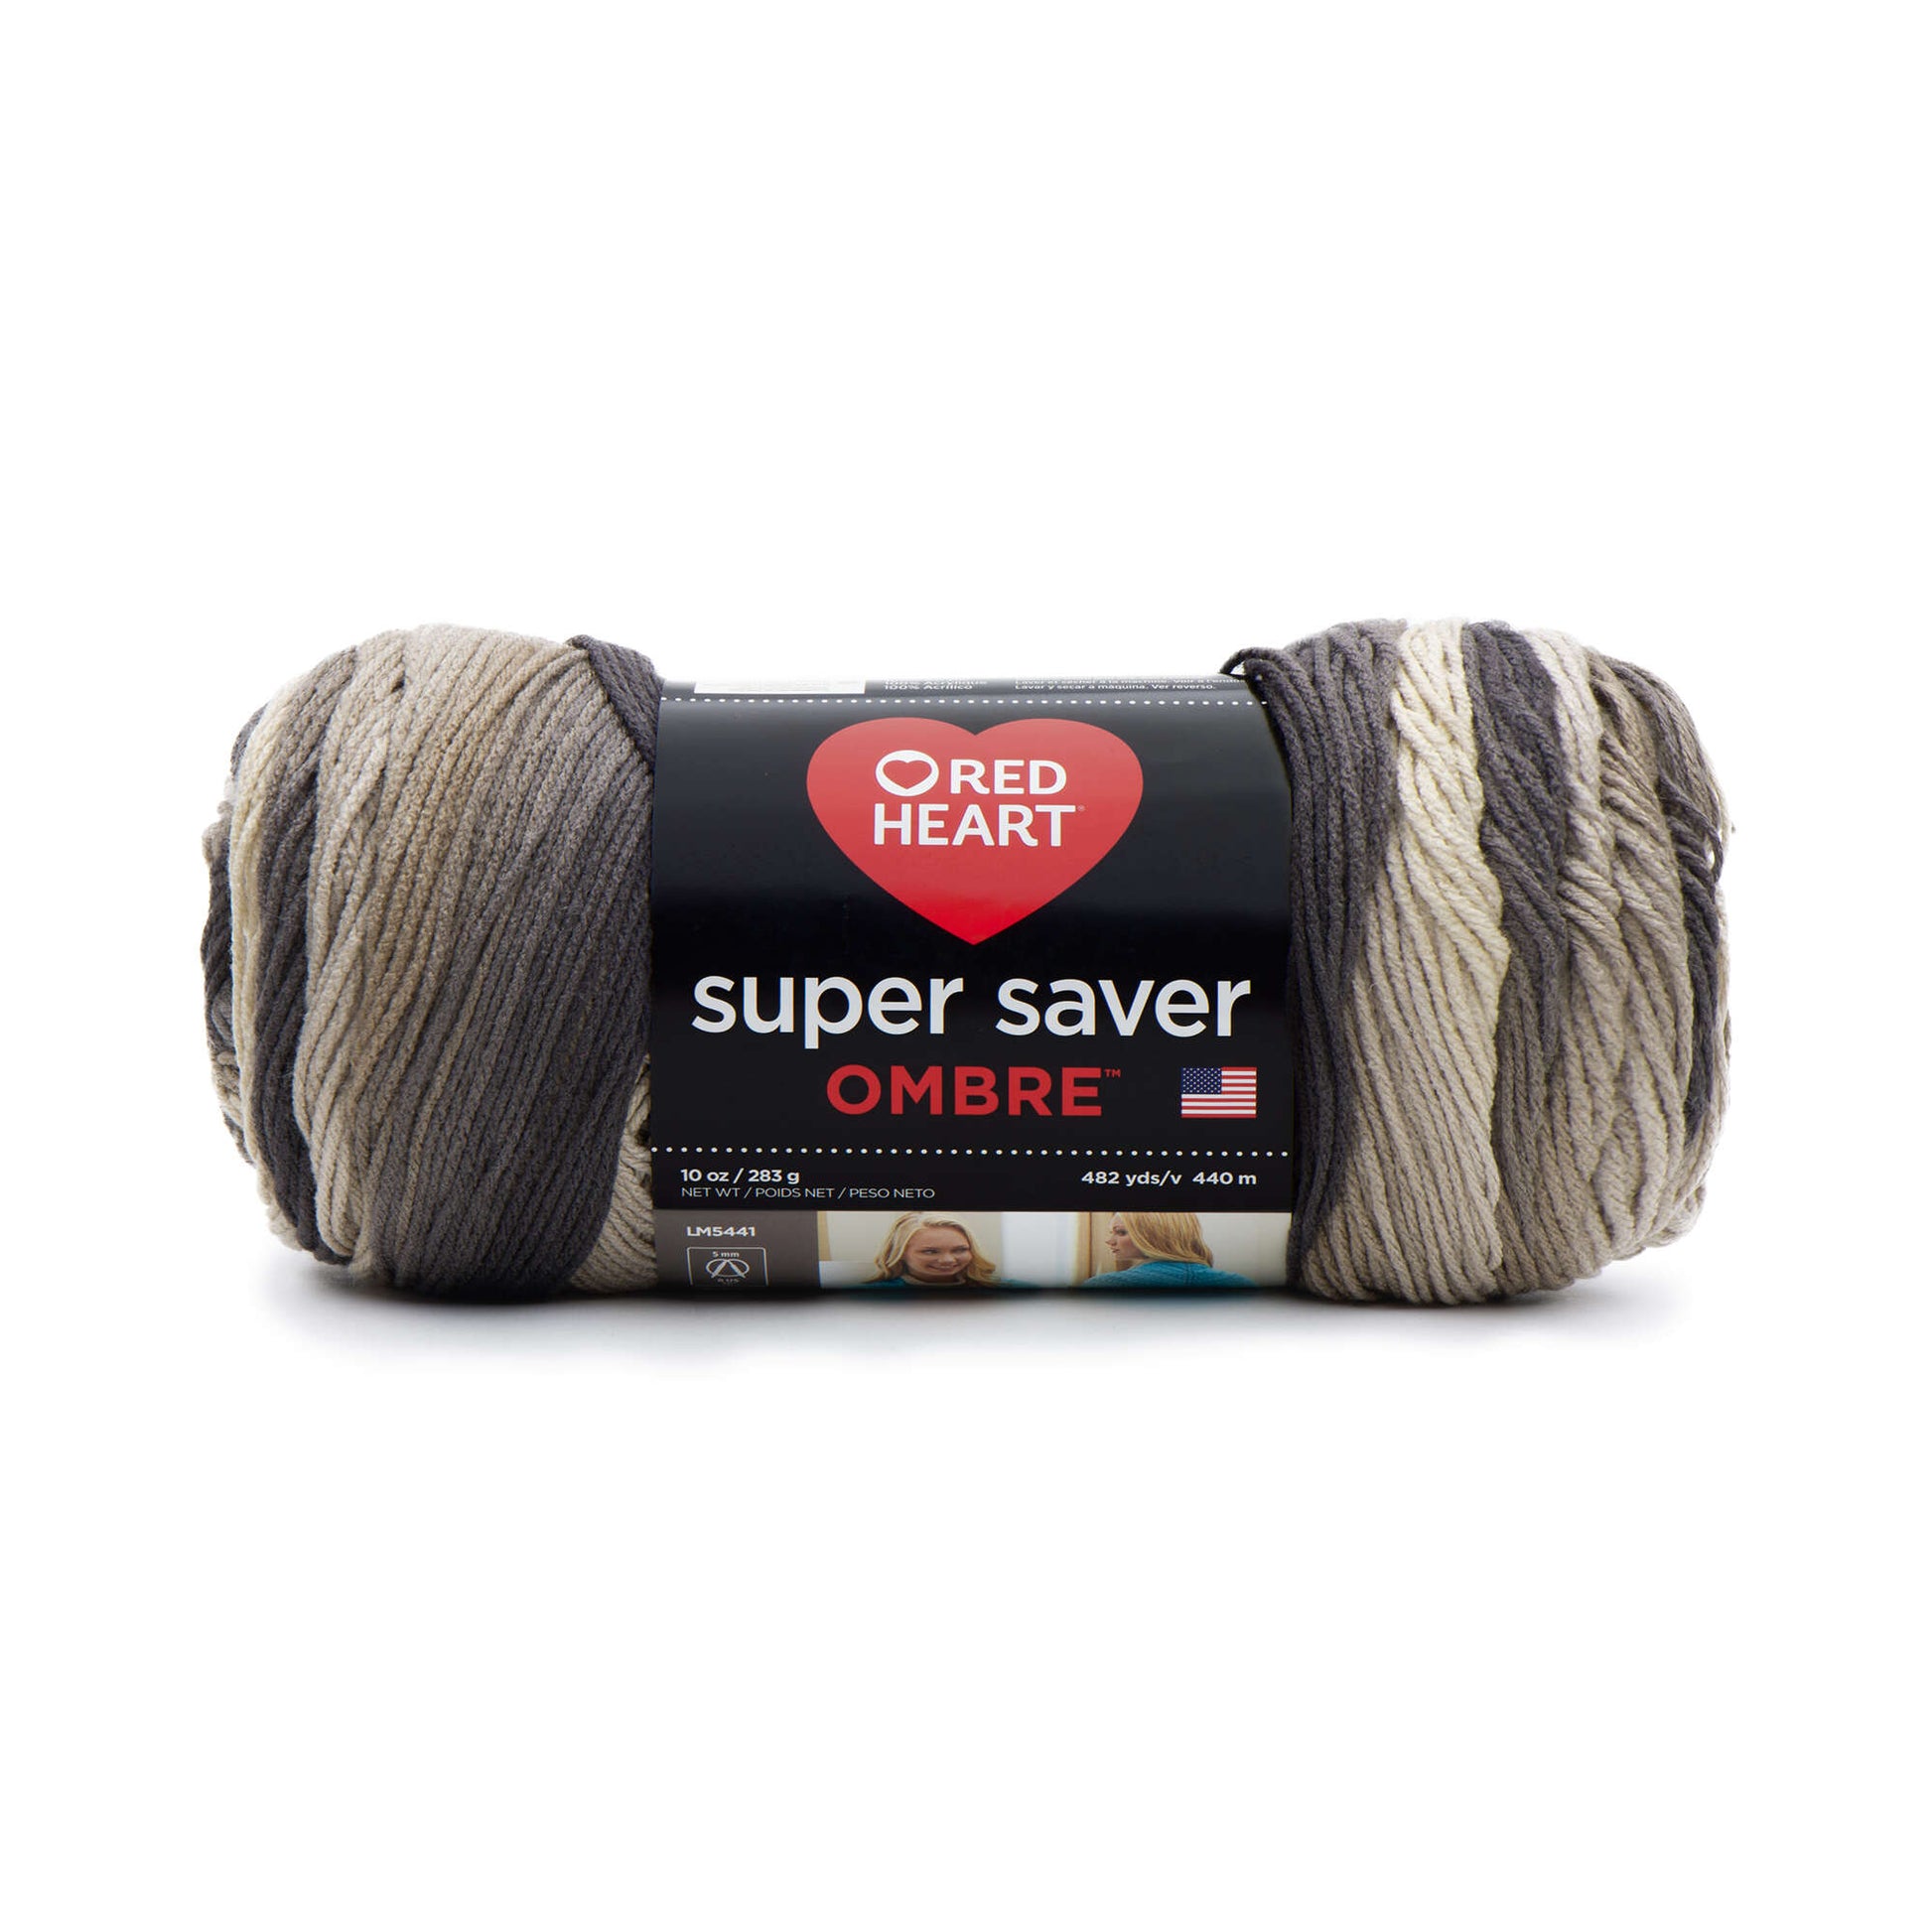 Red Heart Super Saver Ombre Yarn, Lot of 2, Color is Hickory, 482 yds ea.  NEW